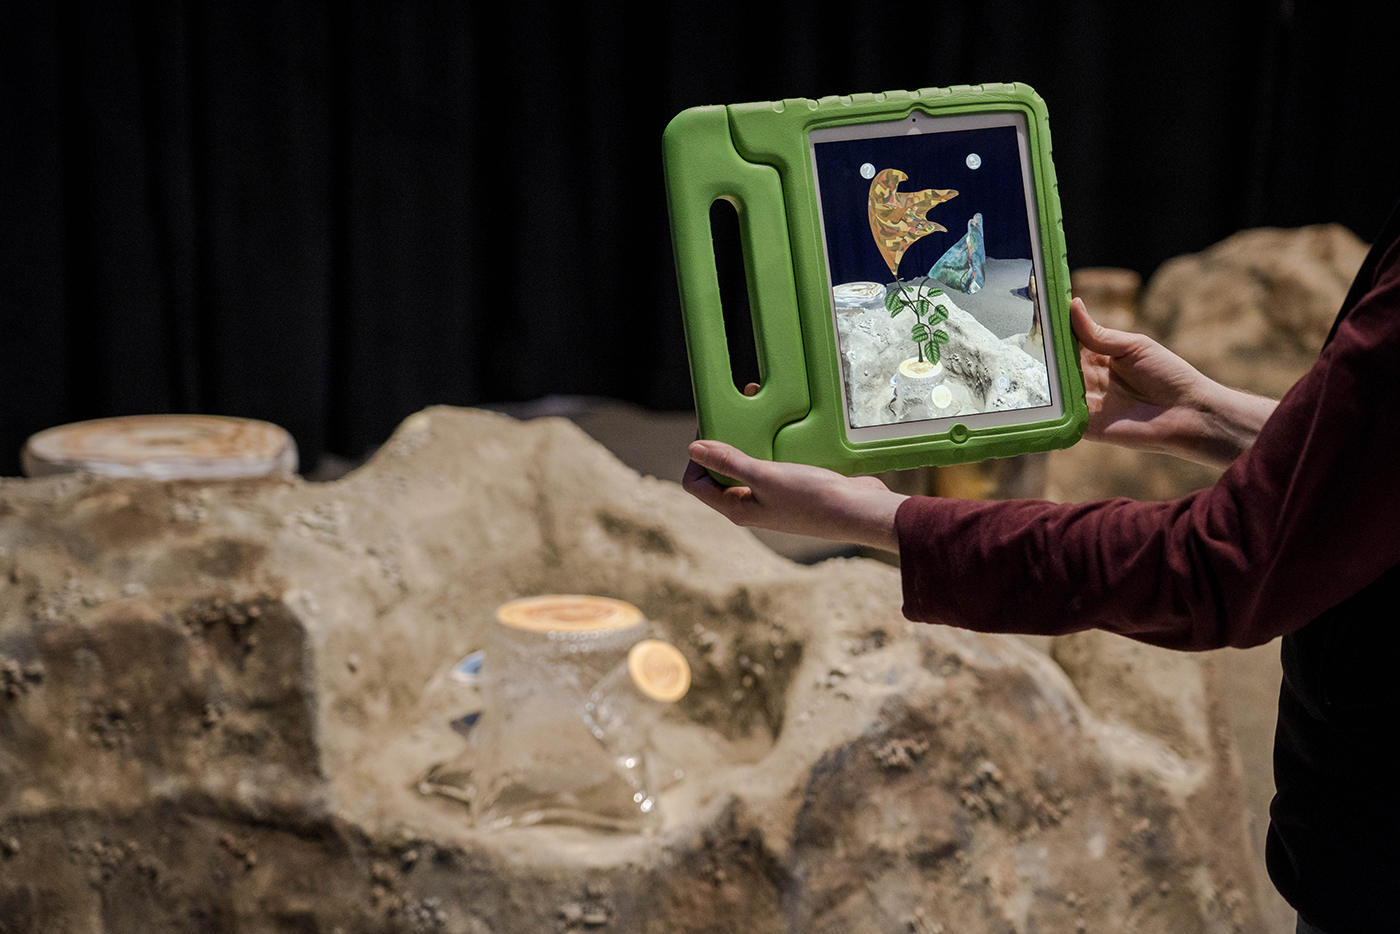 Pair of hands holding an IPad in front of sculpture, an image of flowers appears out of the stump on the IPad.